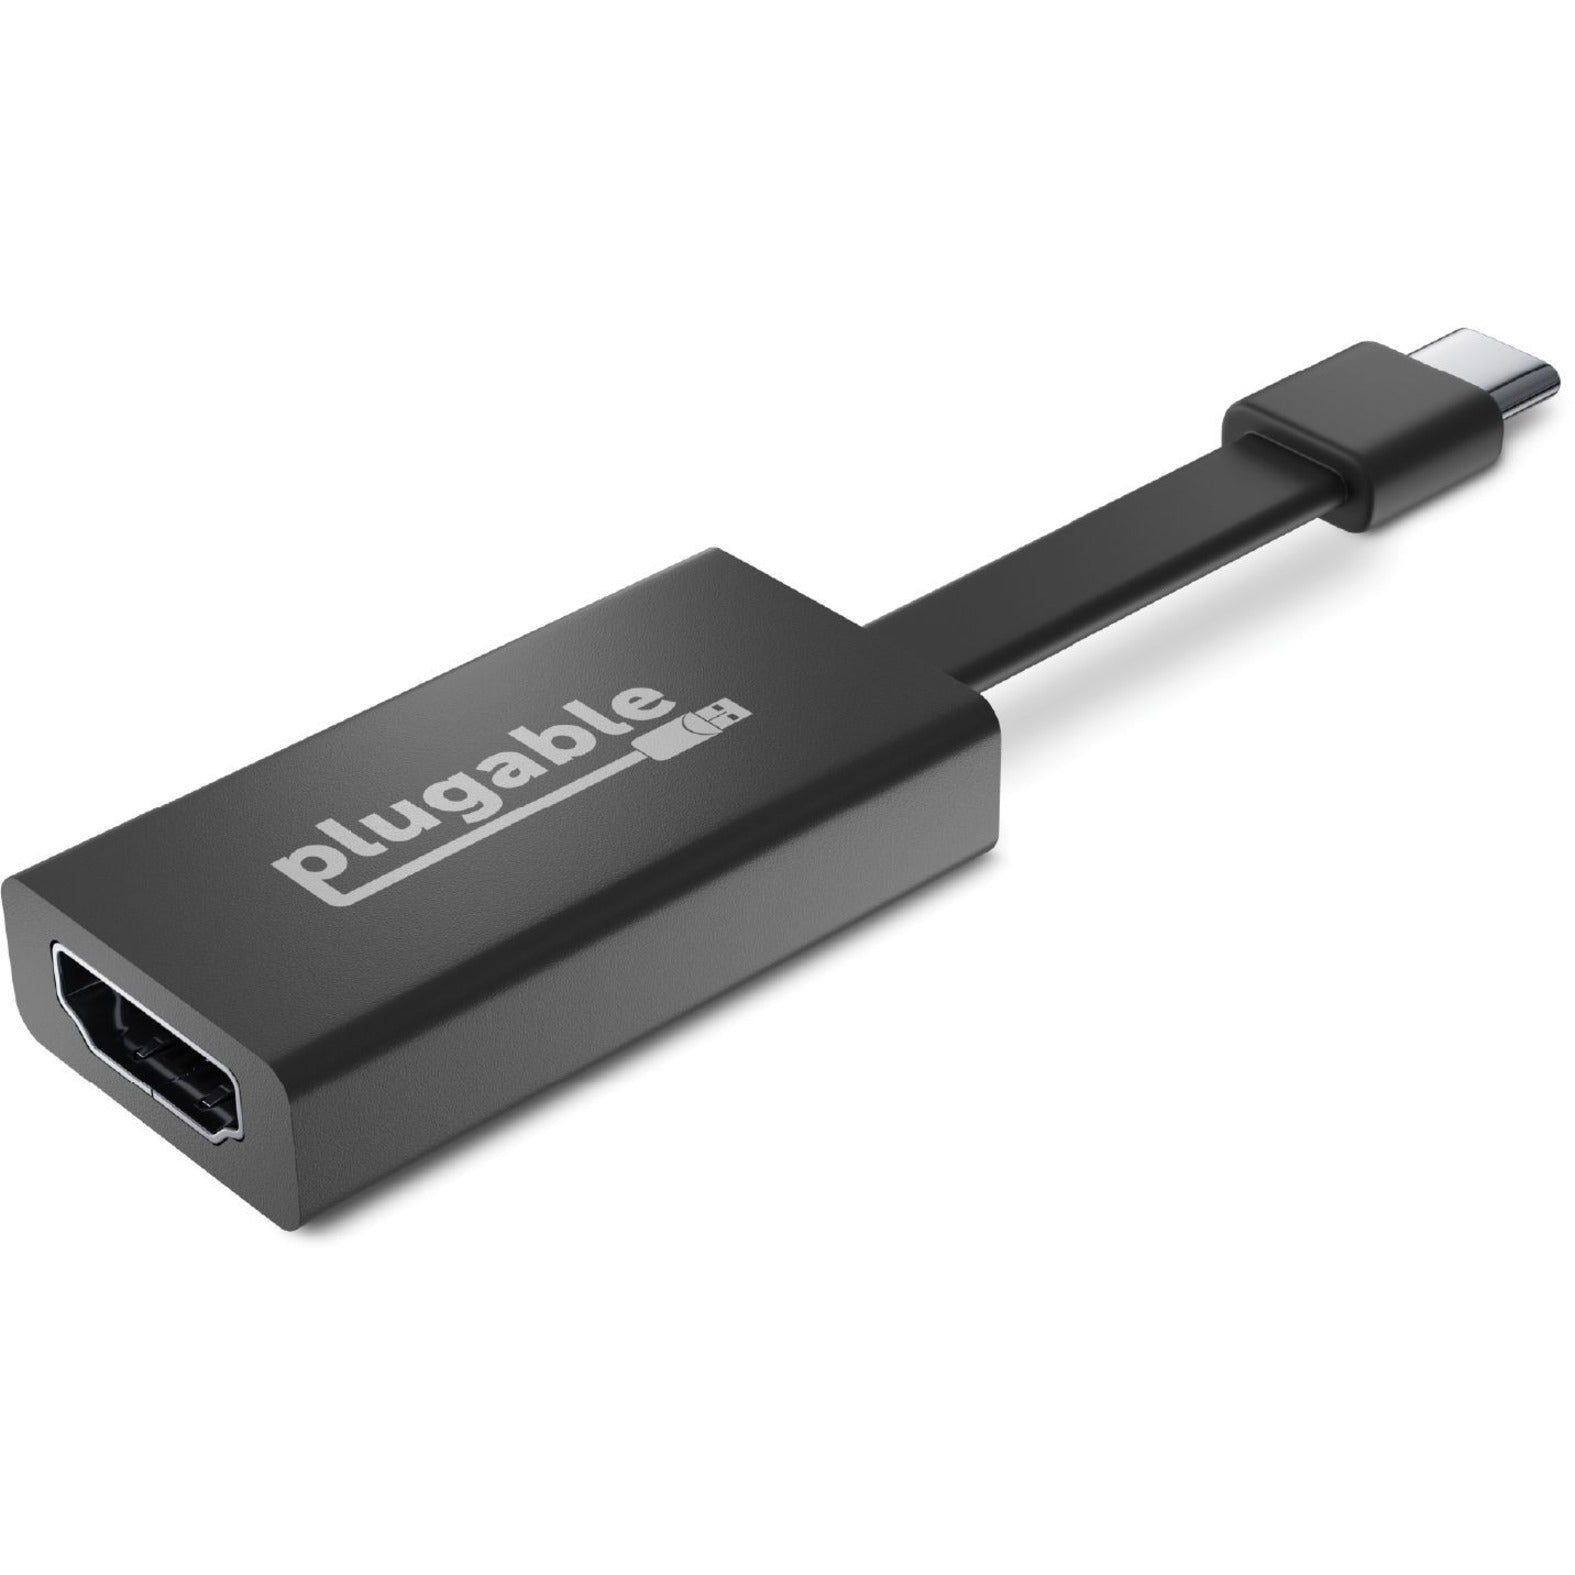 Plugable USBC-THDMI USB-C to HDMI Adapter, Plug and Play, 3840 x 2160 Resolution Supported